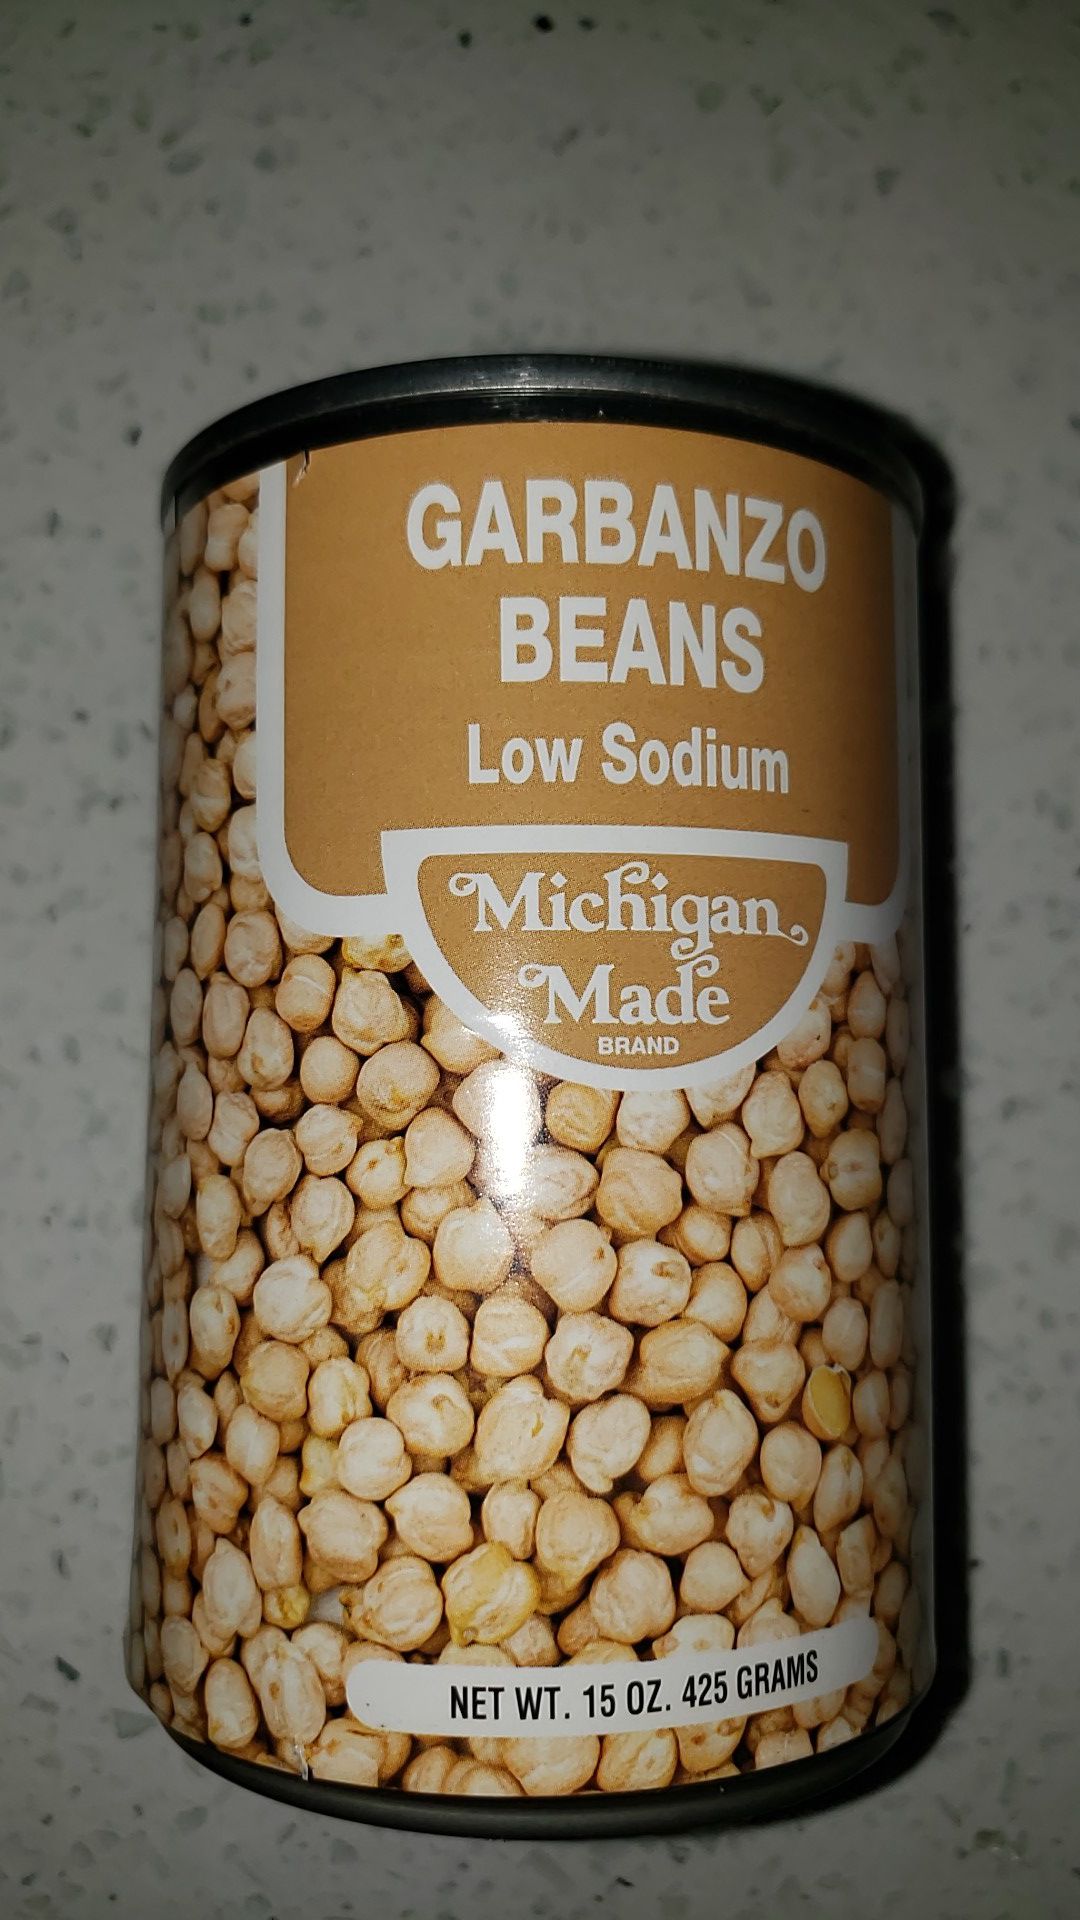 12 cans of garbanzo beans low sodium